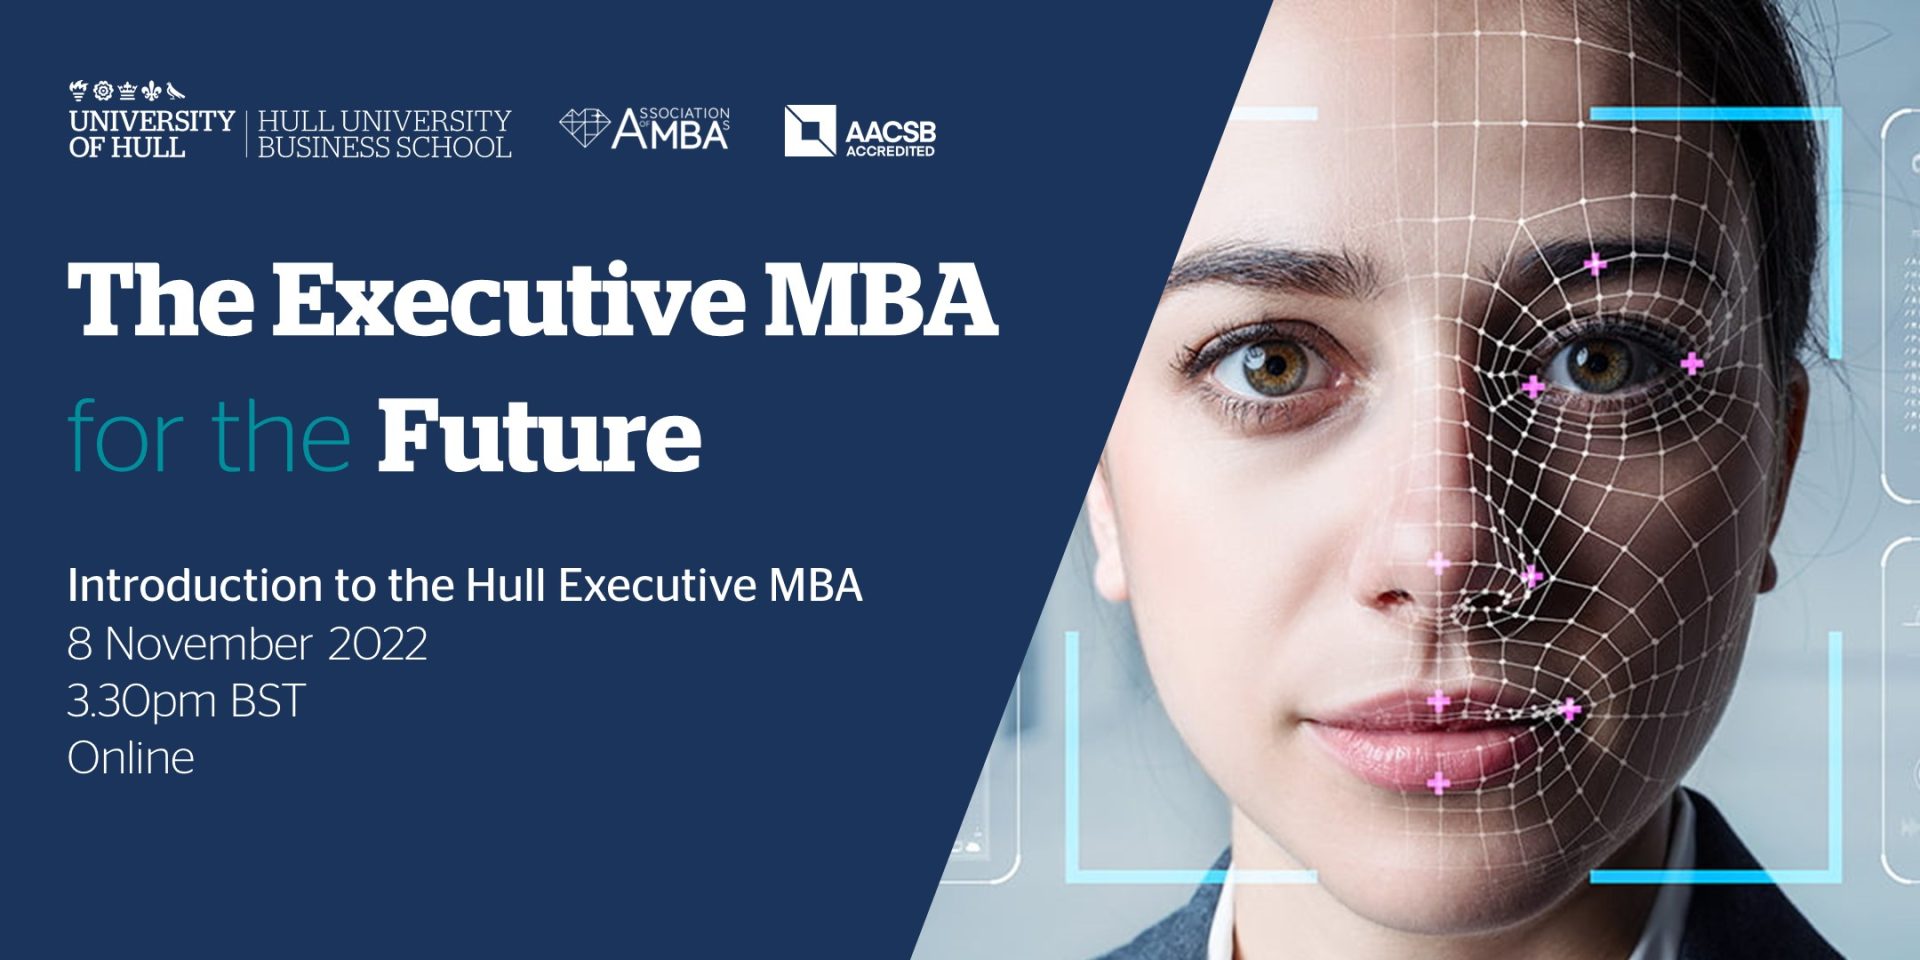 Introduction to the Hull Future Executive MBA